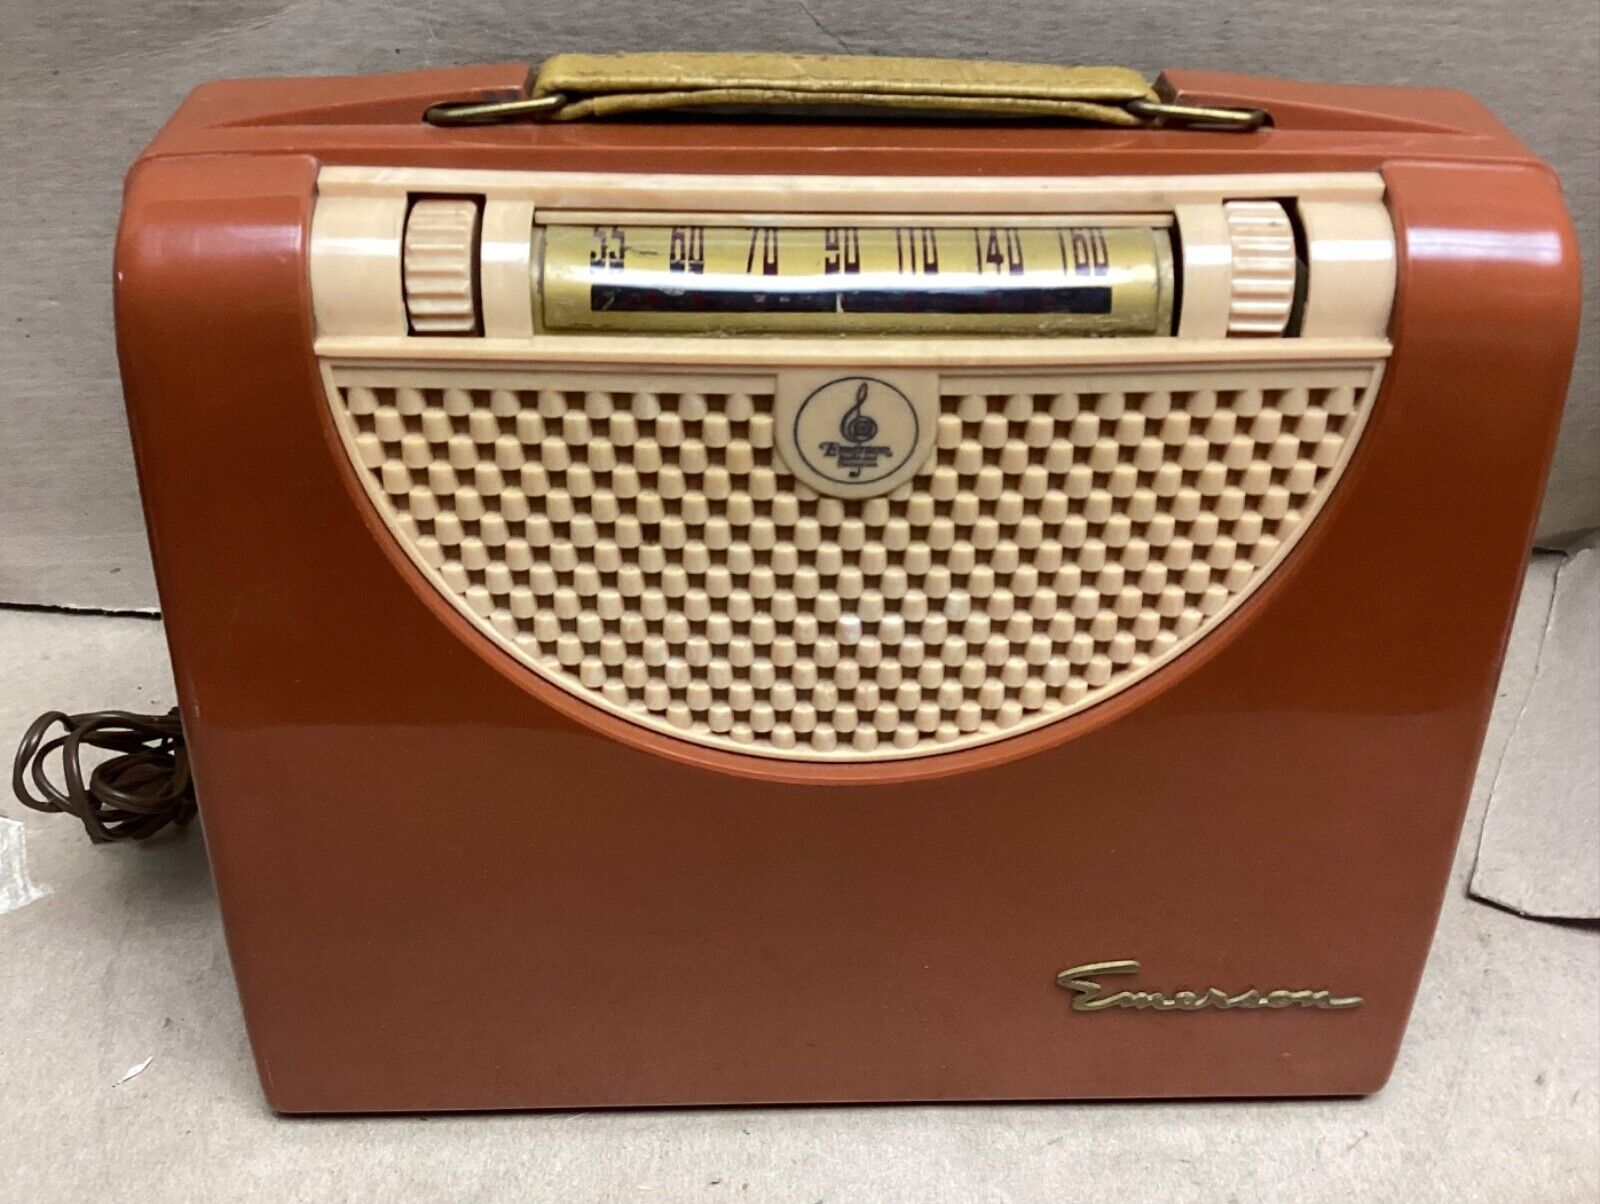 NICE Vintage 1950s Emerson 575A Battery Operated/AC Portable AM Radio